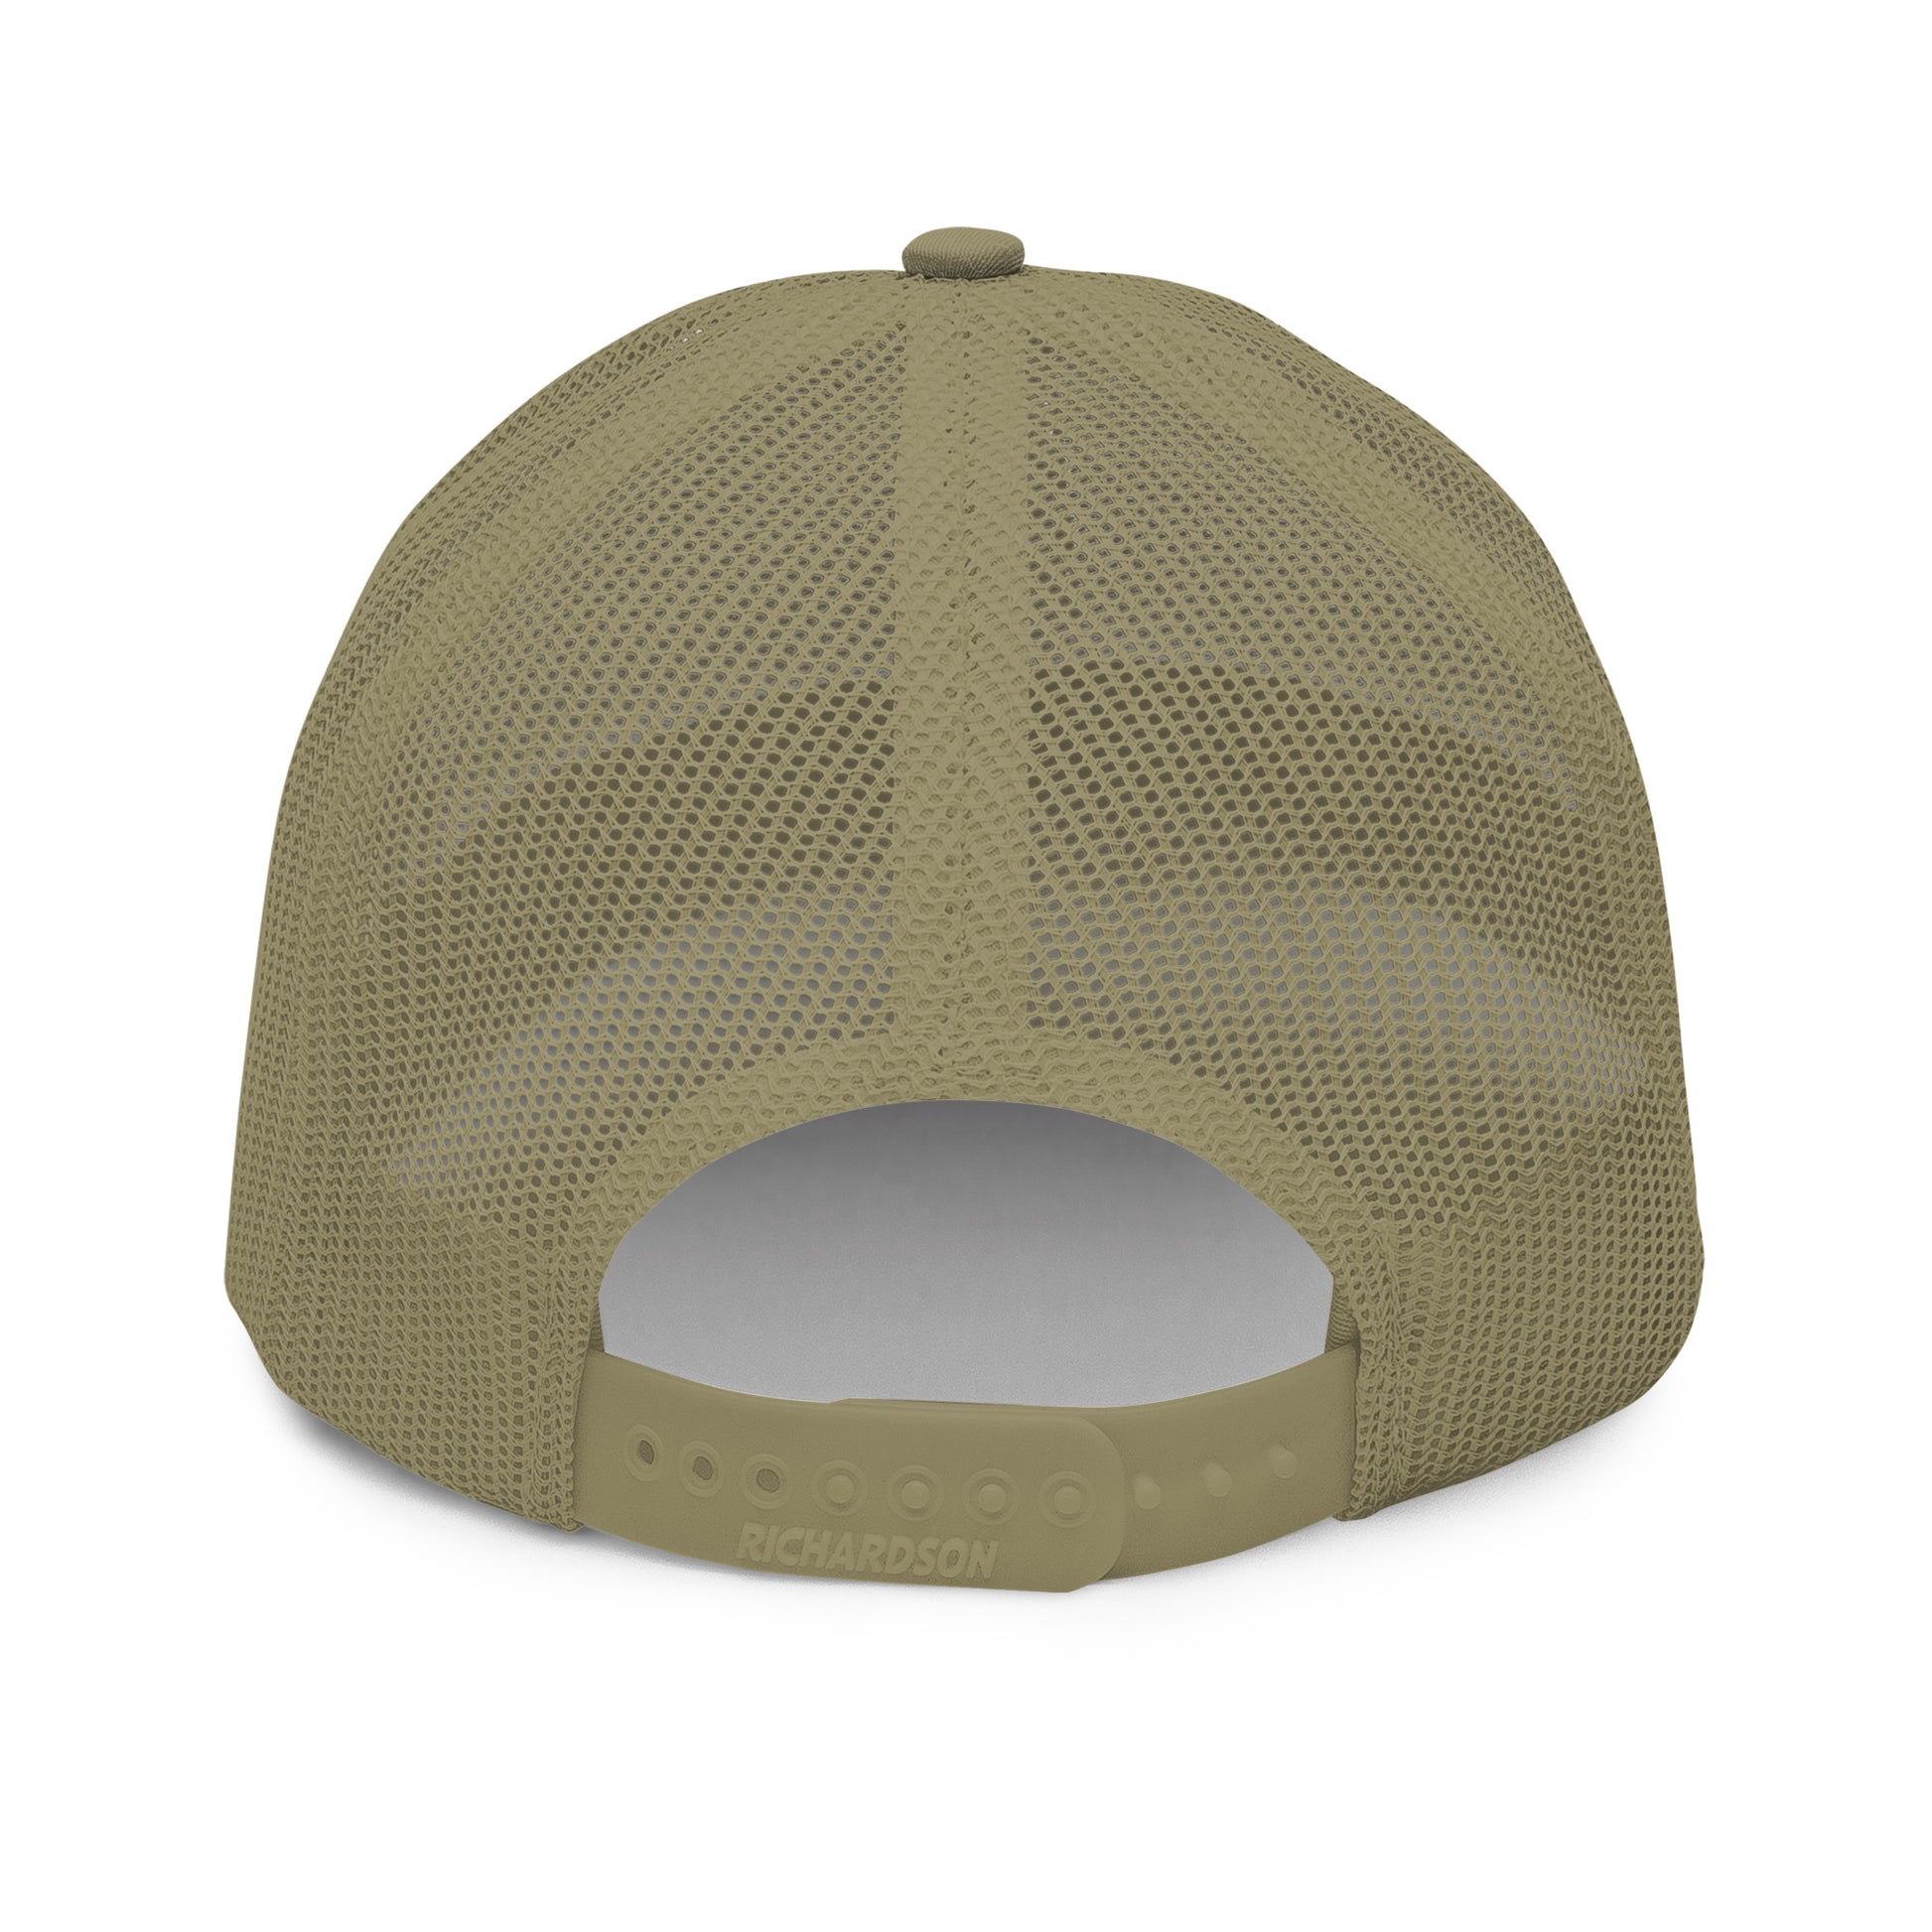 ovRland365 - Low Level Adventure overland hat. tan/tan back view. overland365.com